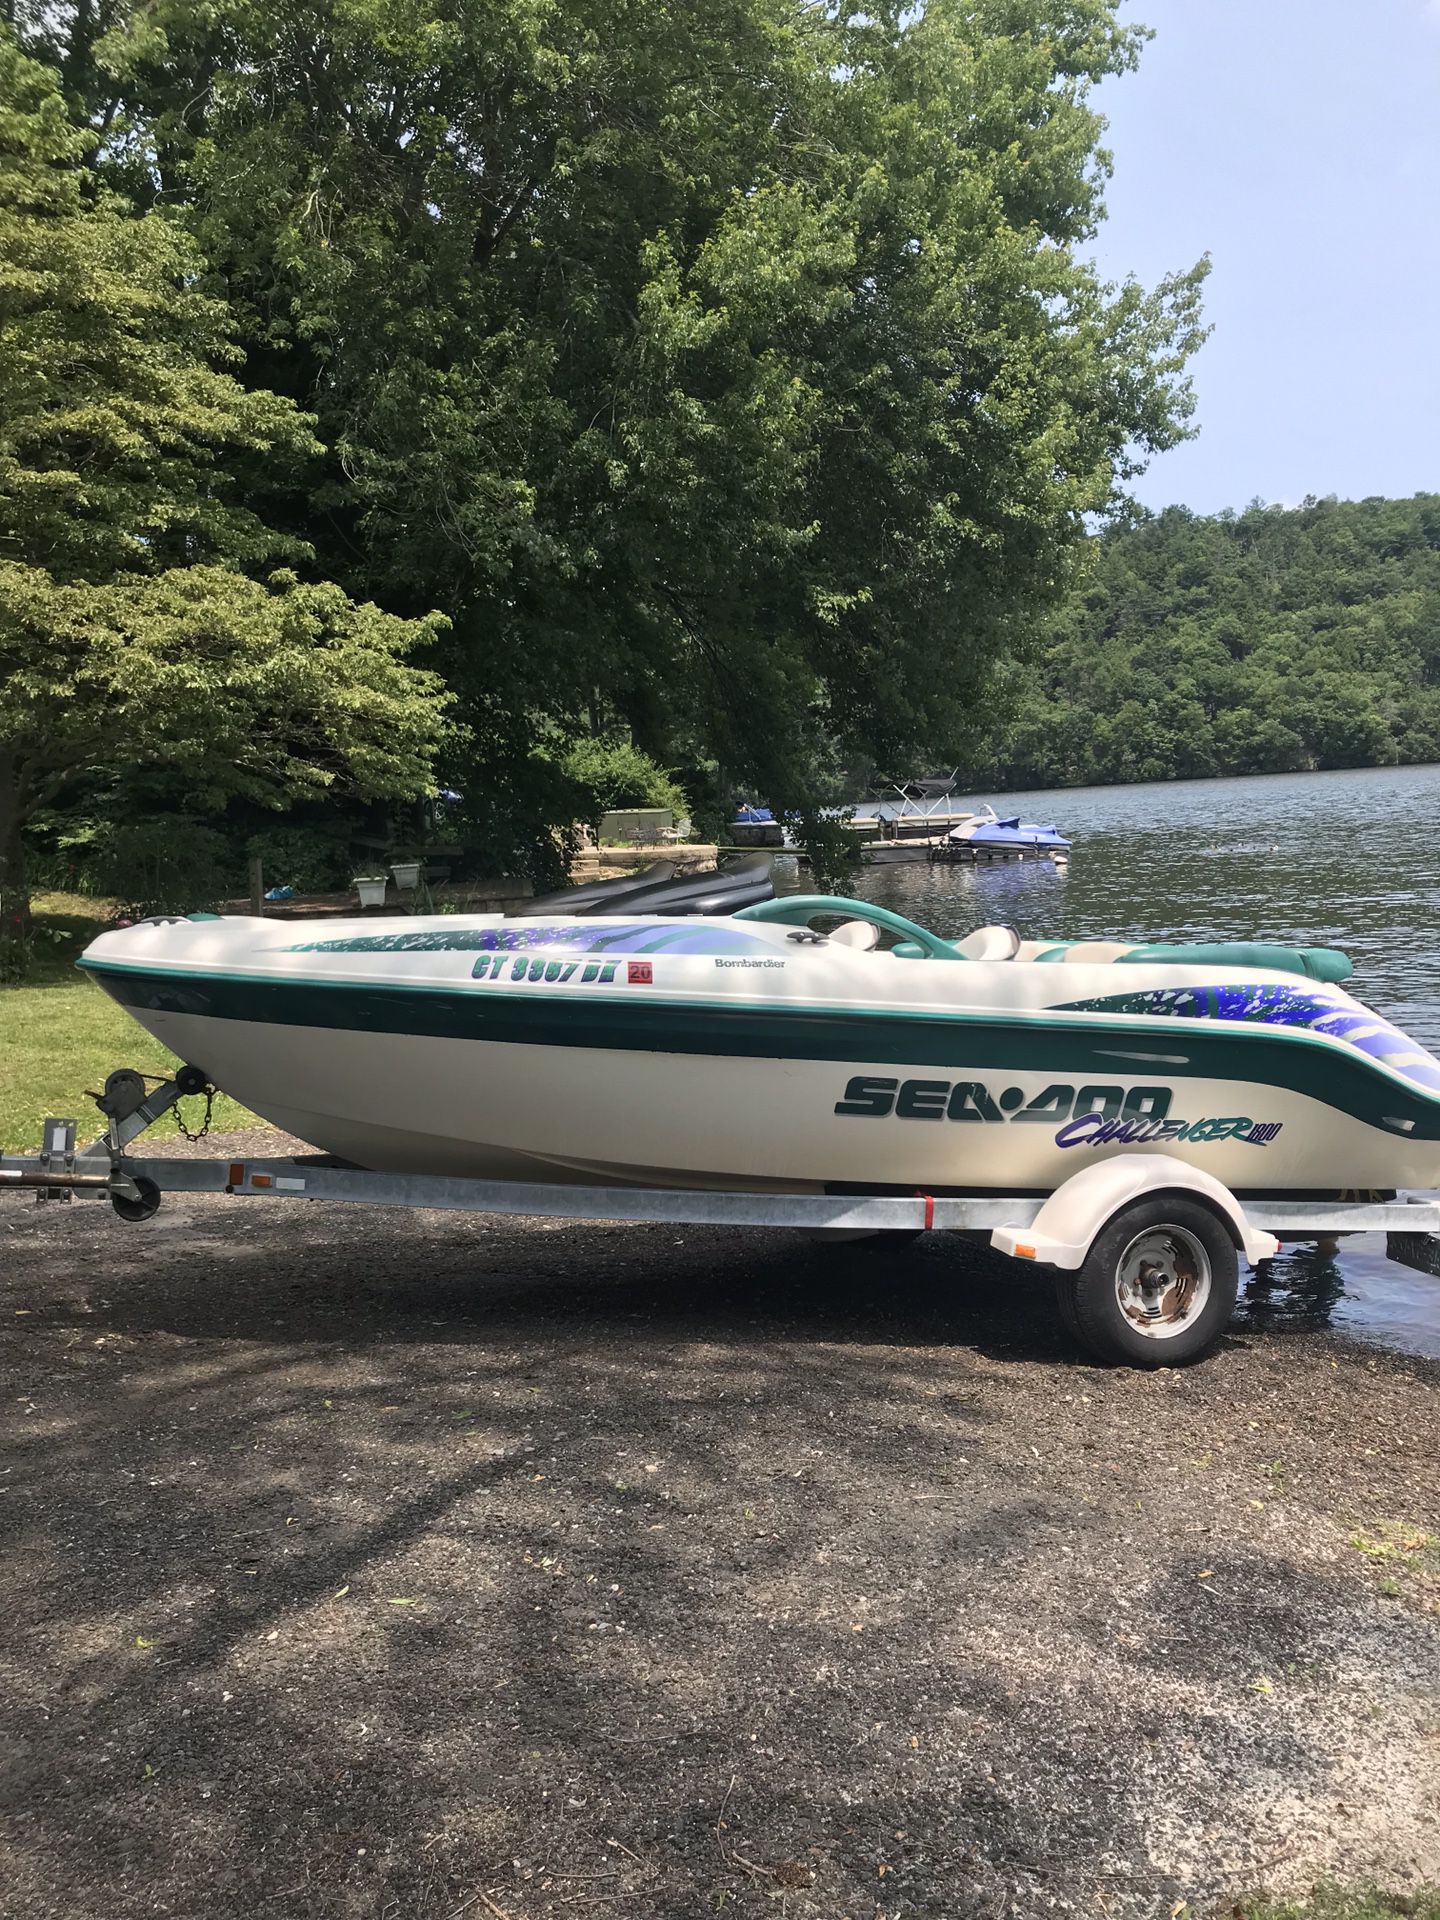 1998 Seadoo Challenger Jet boat with trailer